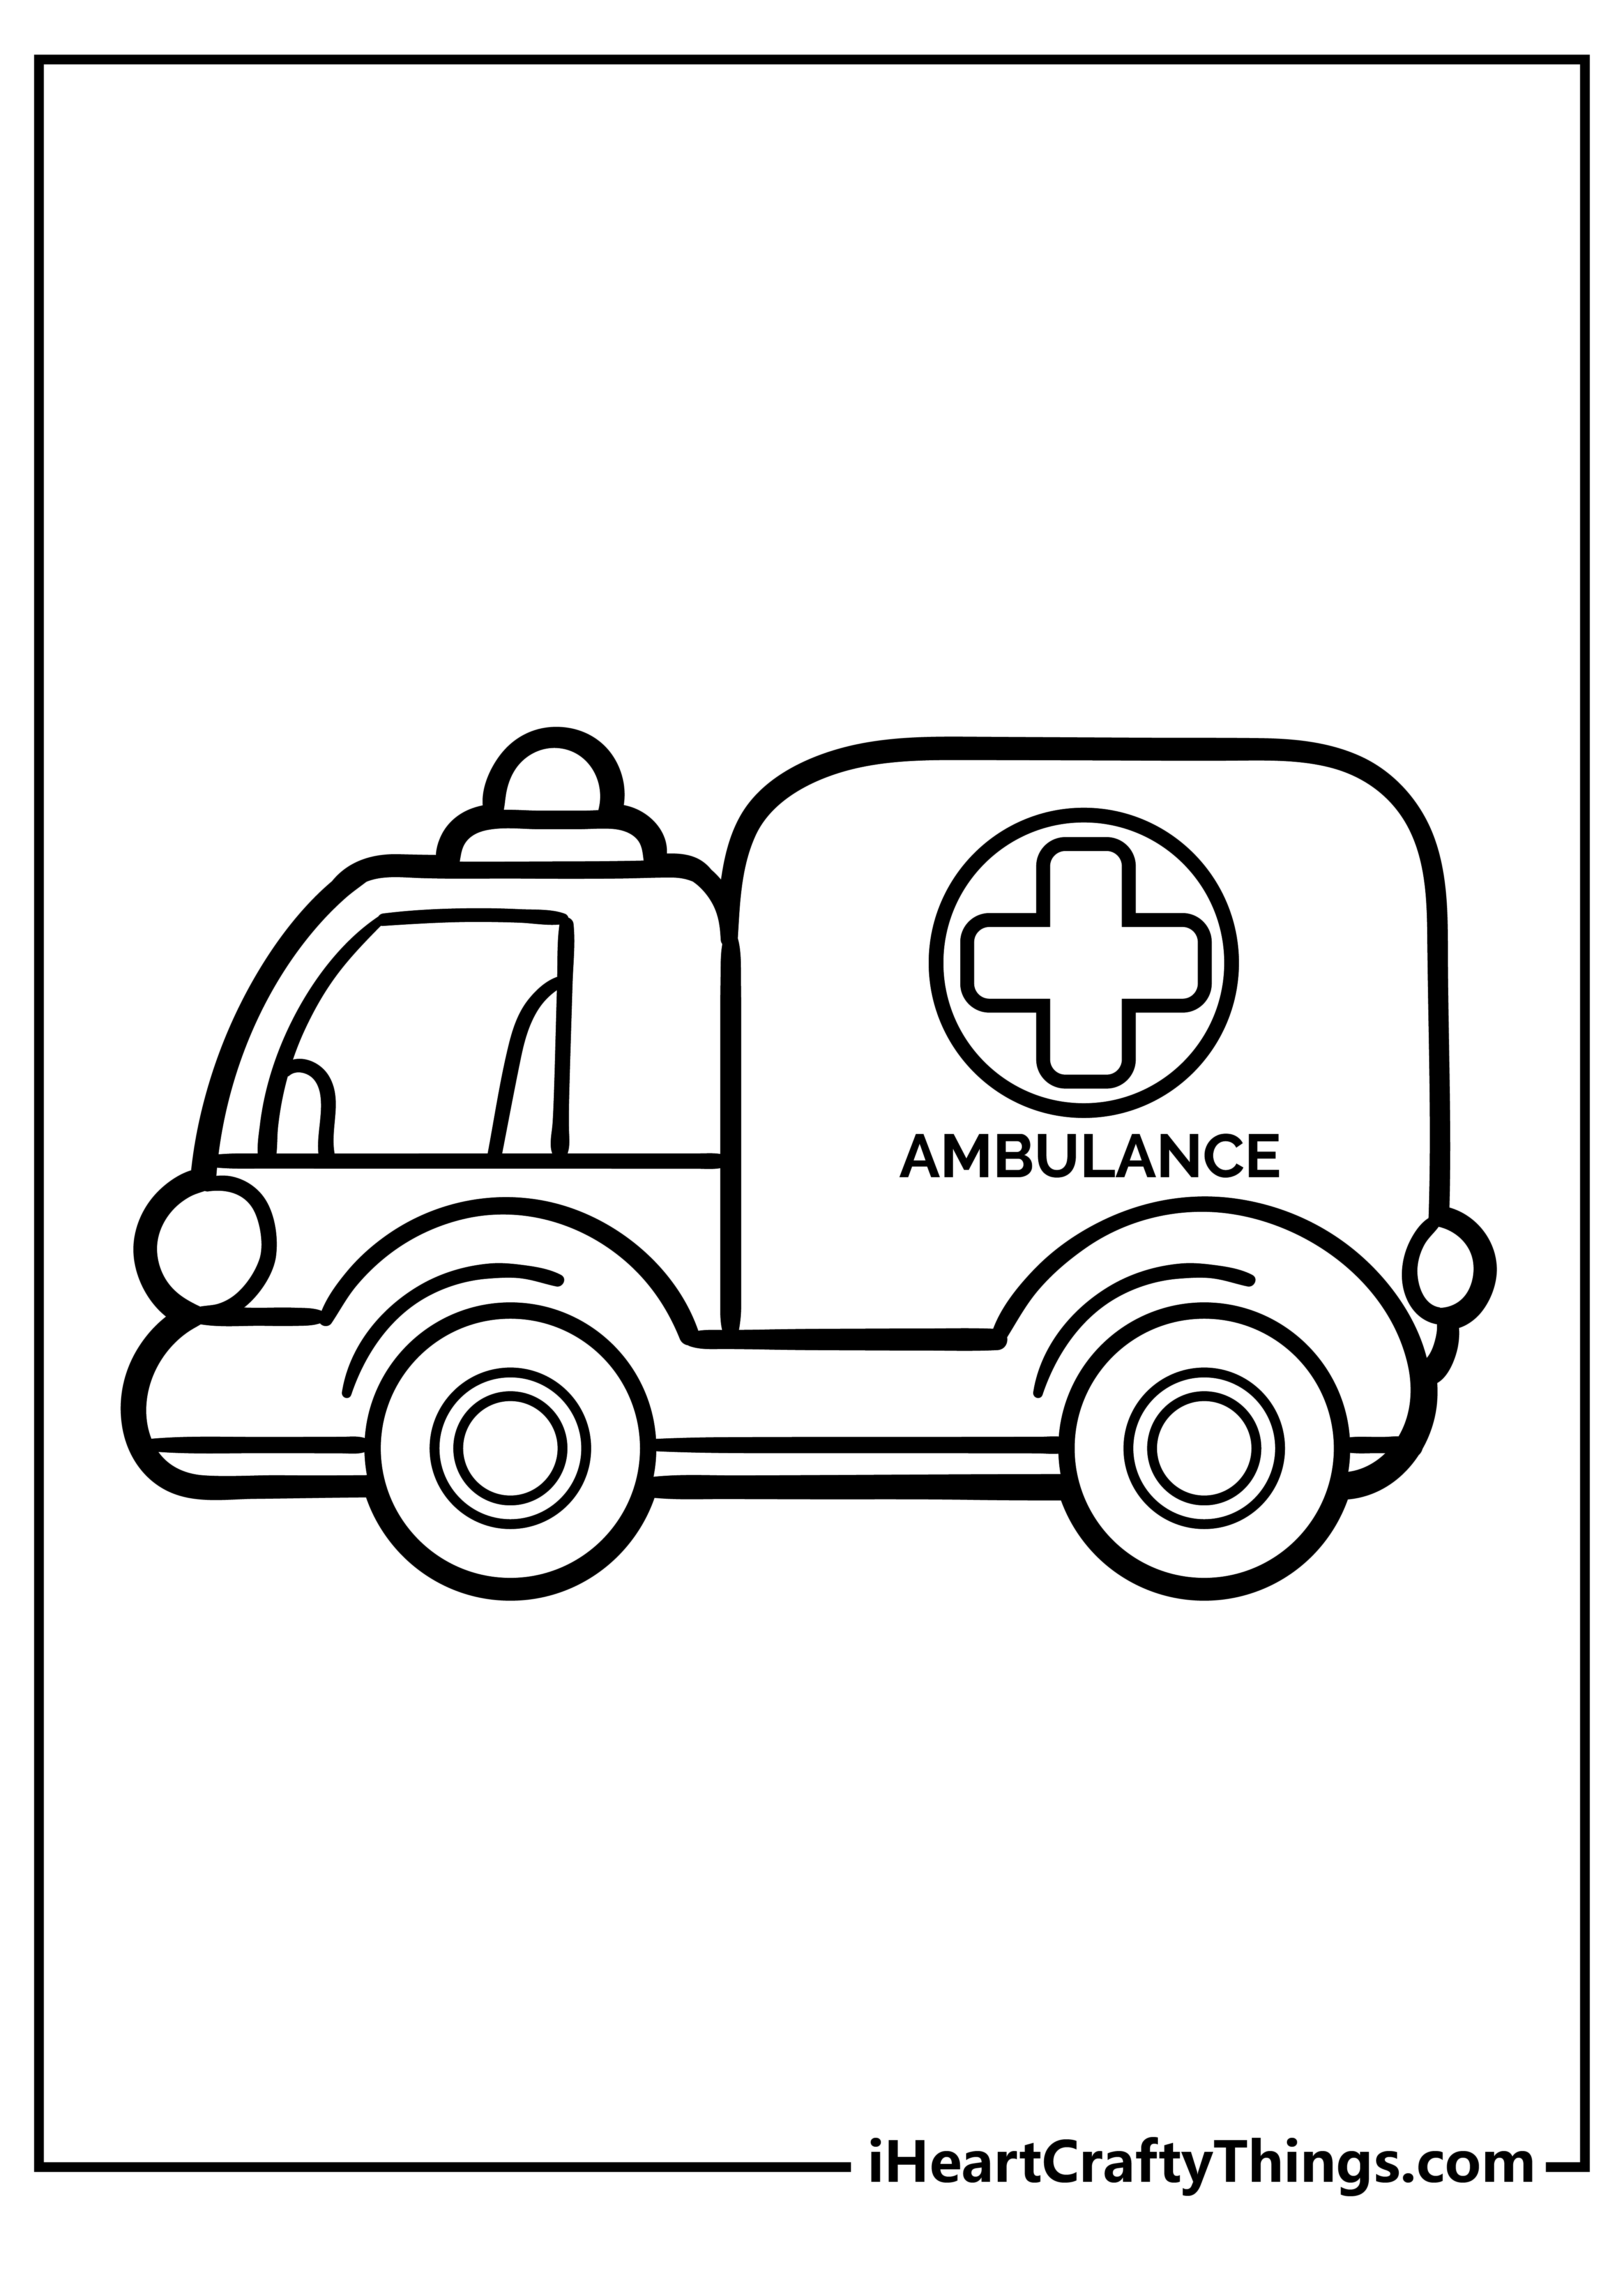 Ambulance pages free printables